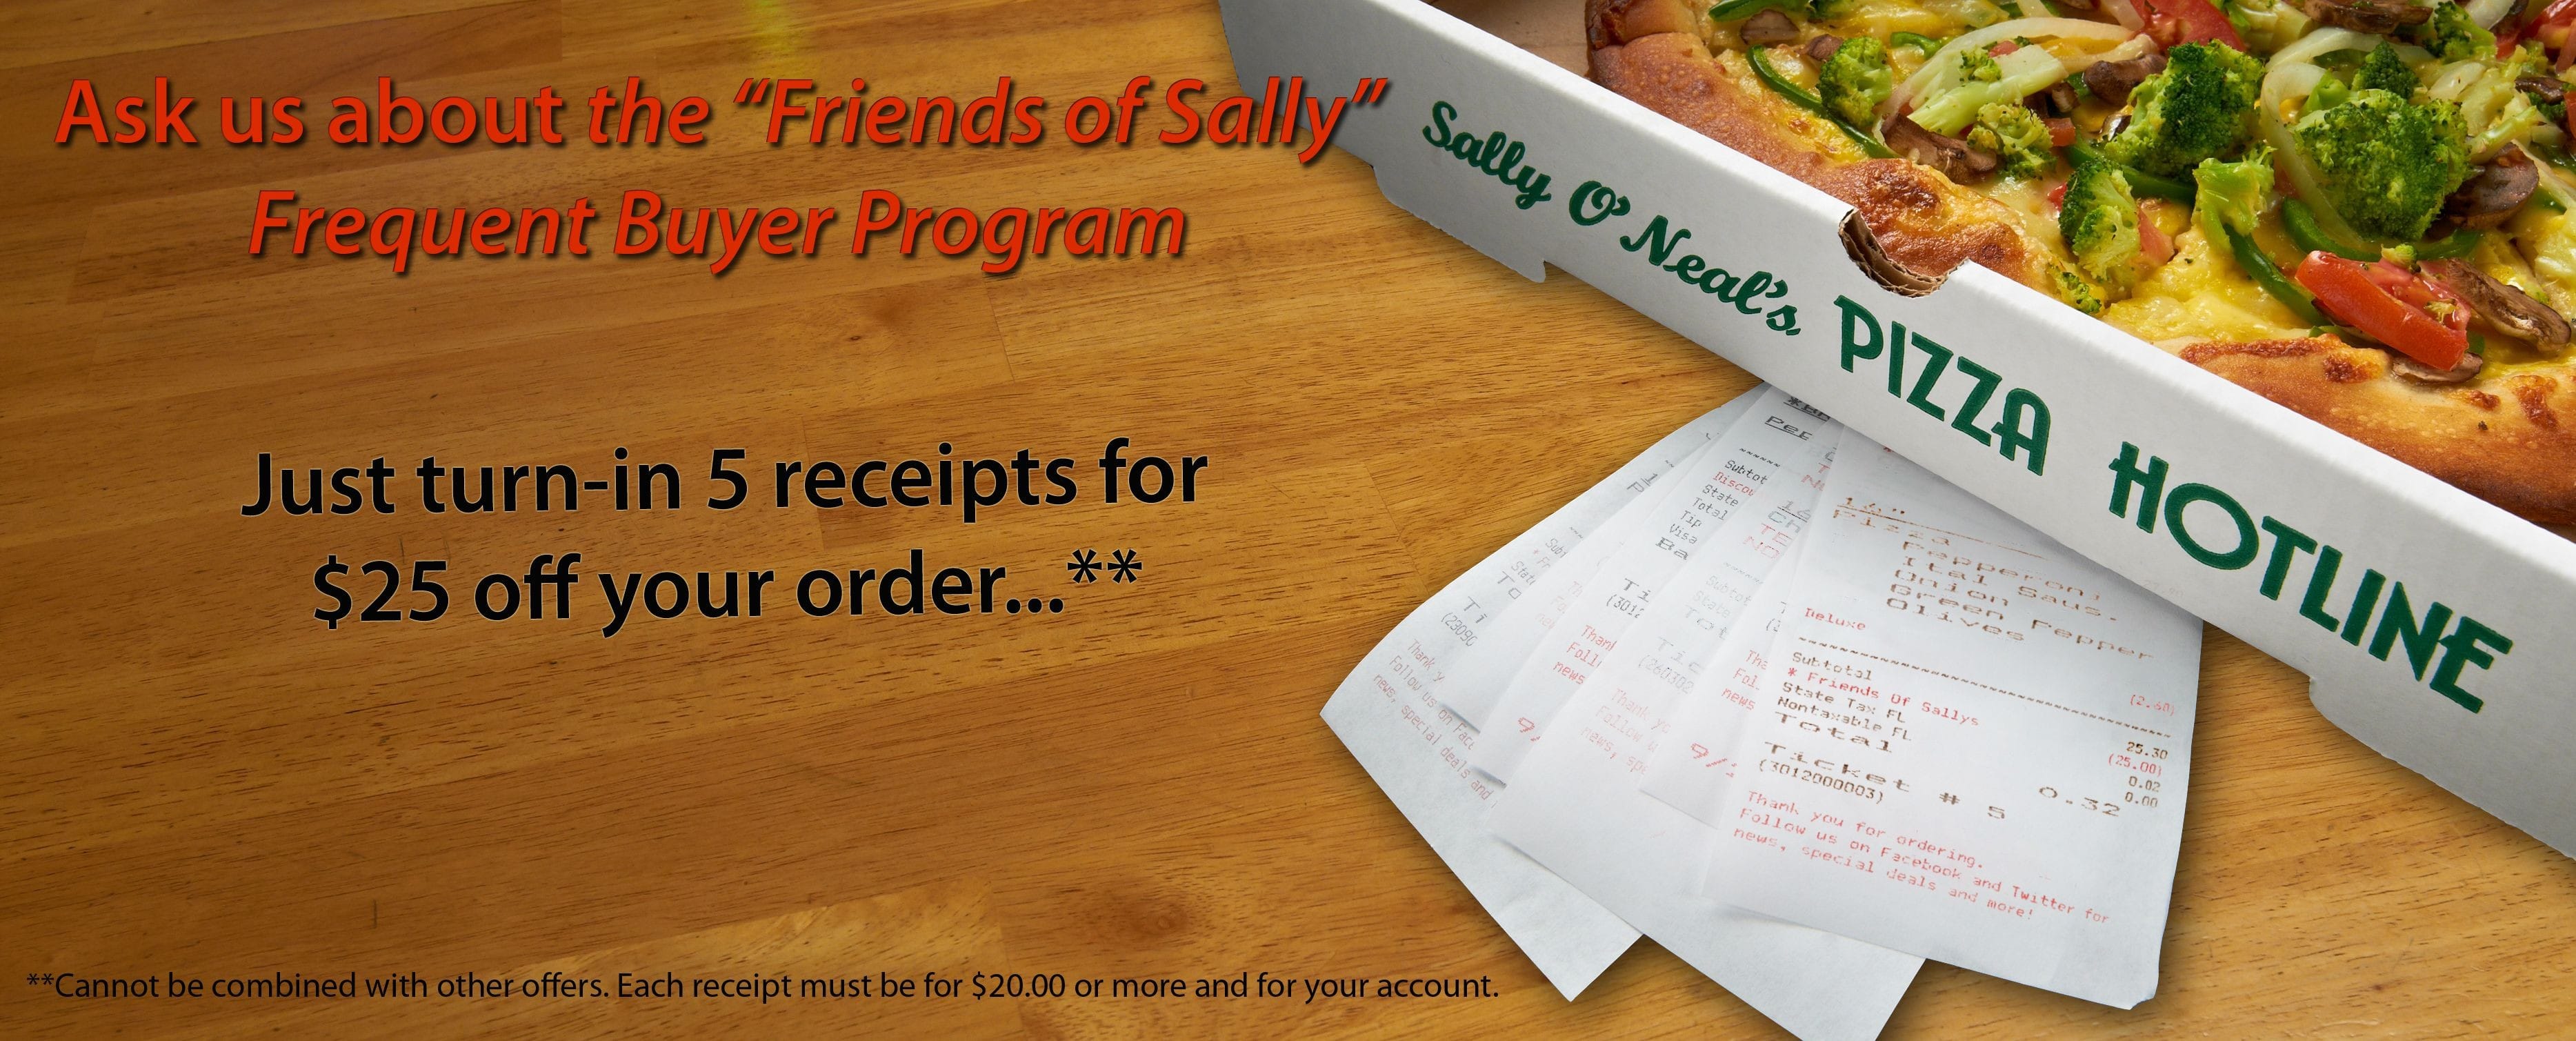 Details: Just turn in 5 receipts for $20 or more each, and get $25 off your order.
Cannot be combined with other offers. Receipts must all be from your account.